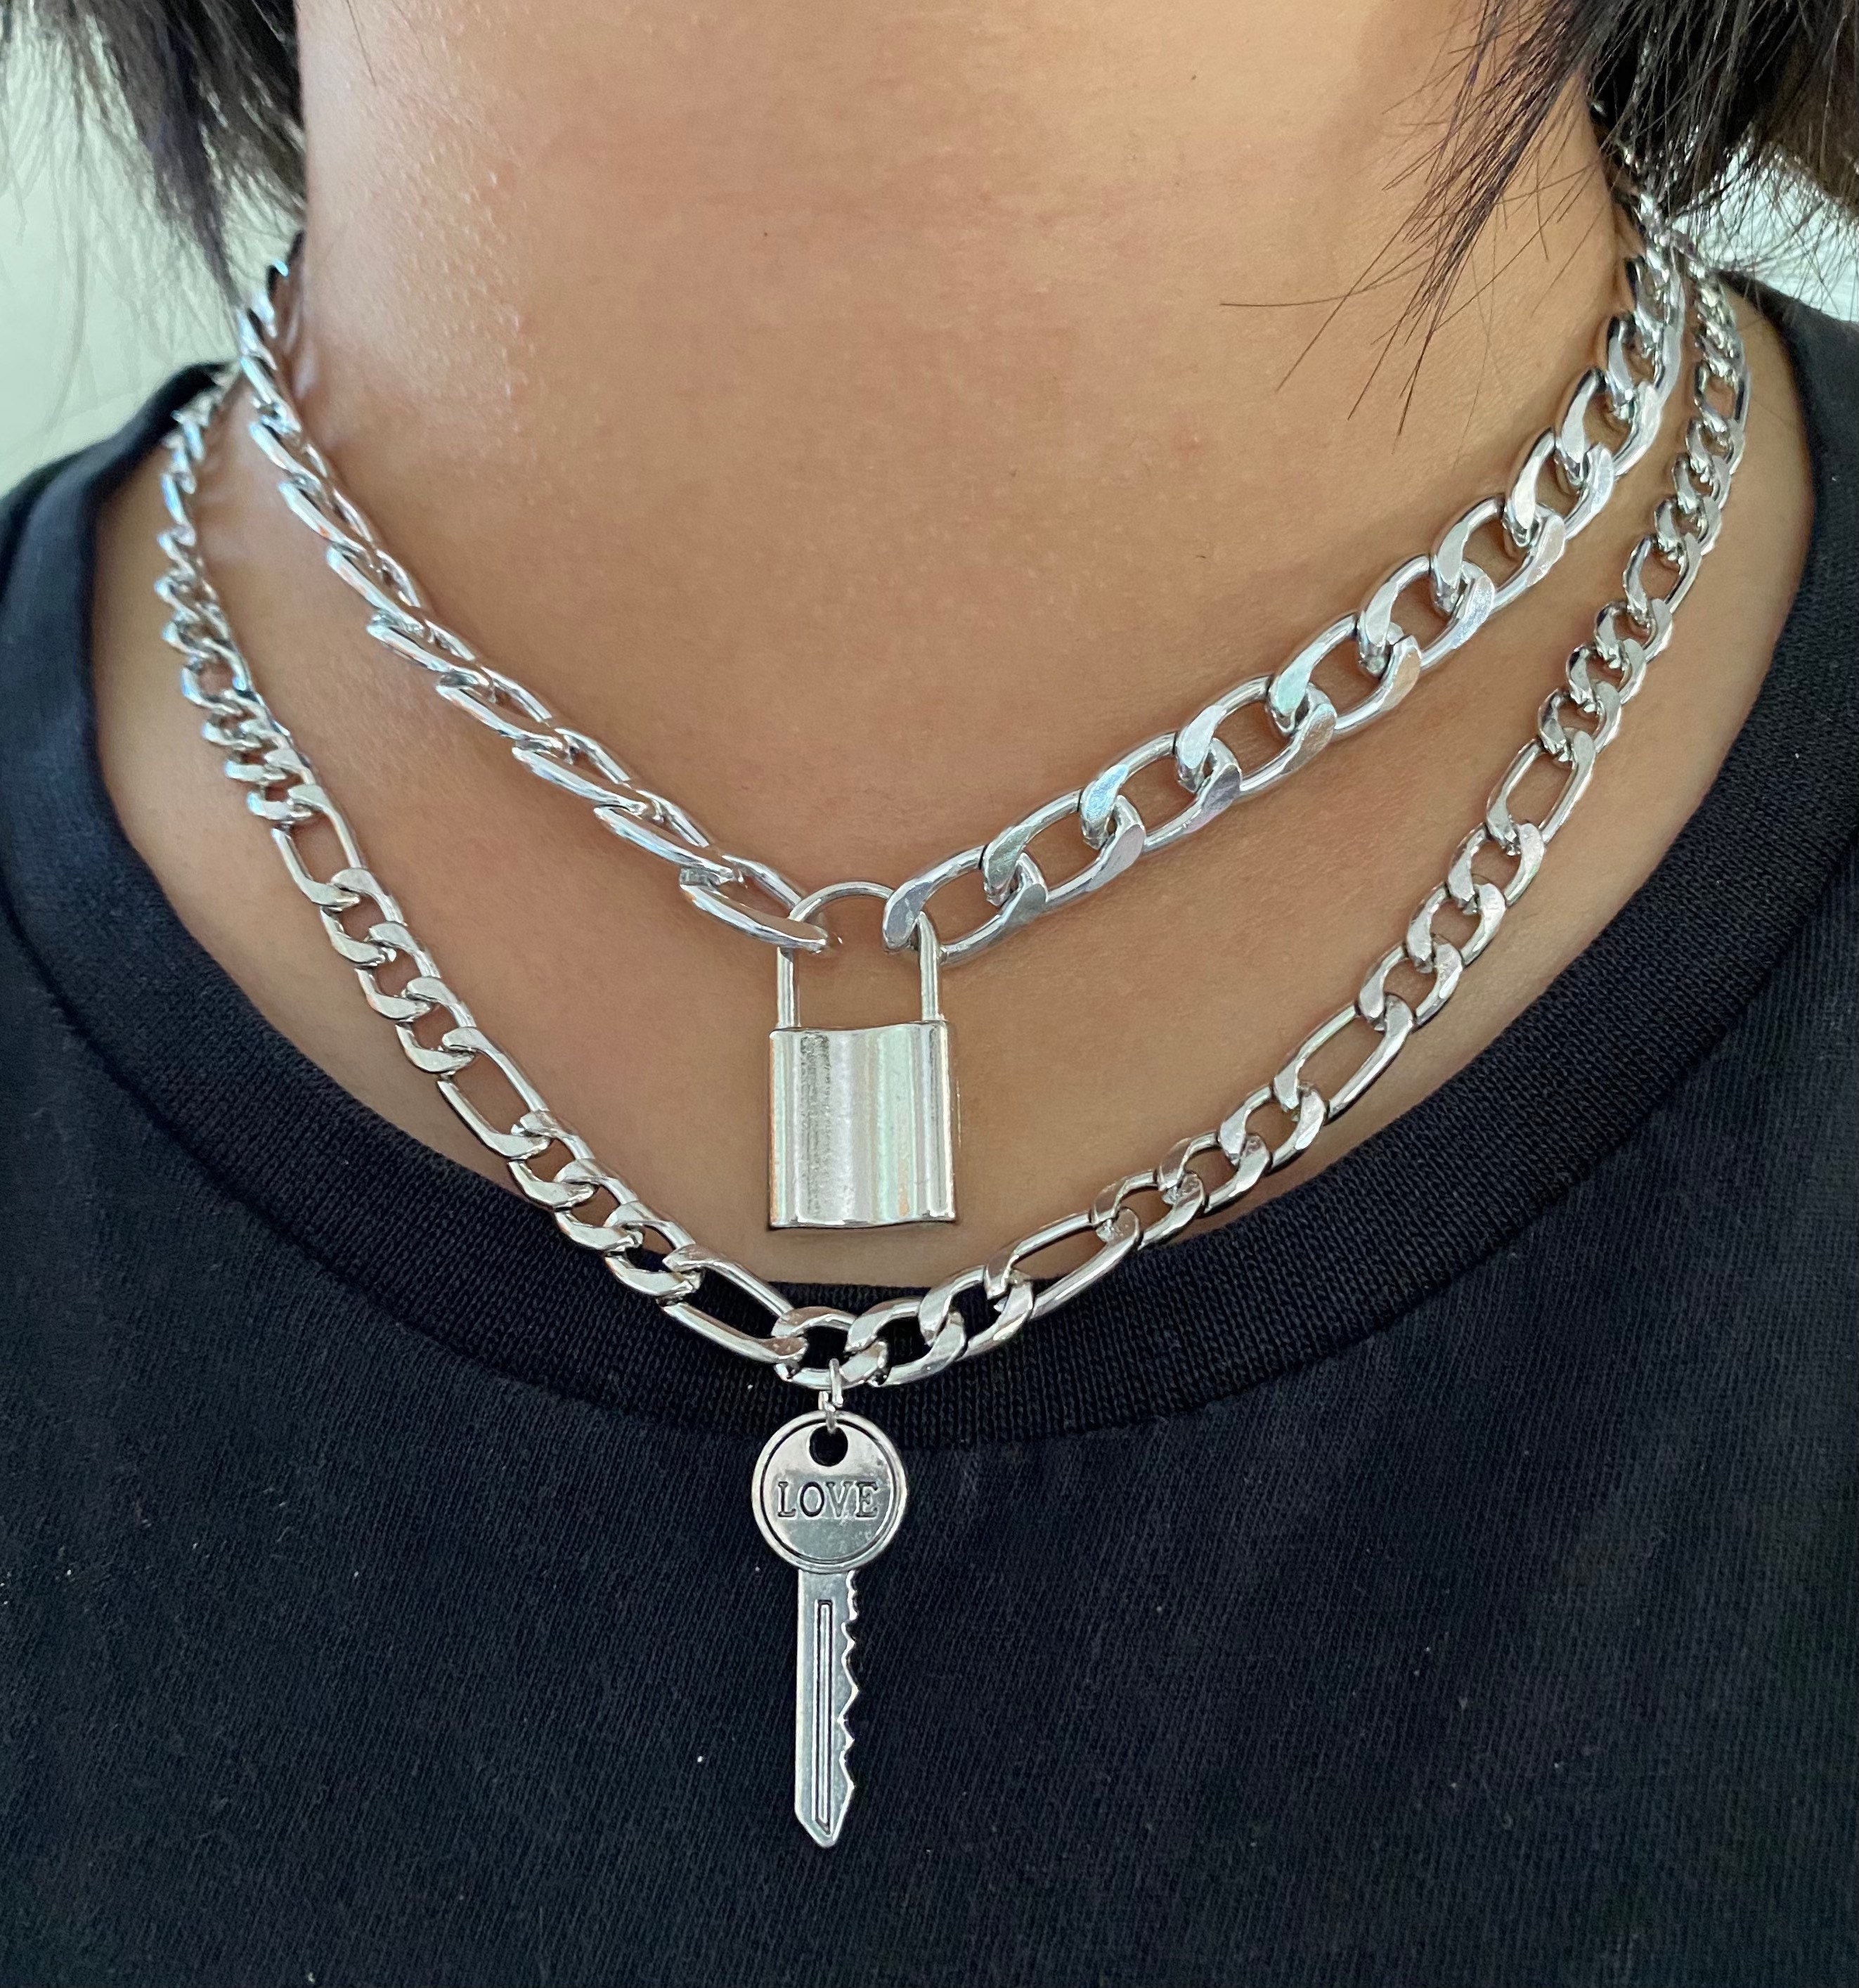 Lock Key Pendant Necklace Statement Long Chain Punk Choker Necklace  Valentine‘s Day Gift for Women Girlfriend Wife, Silver